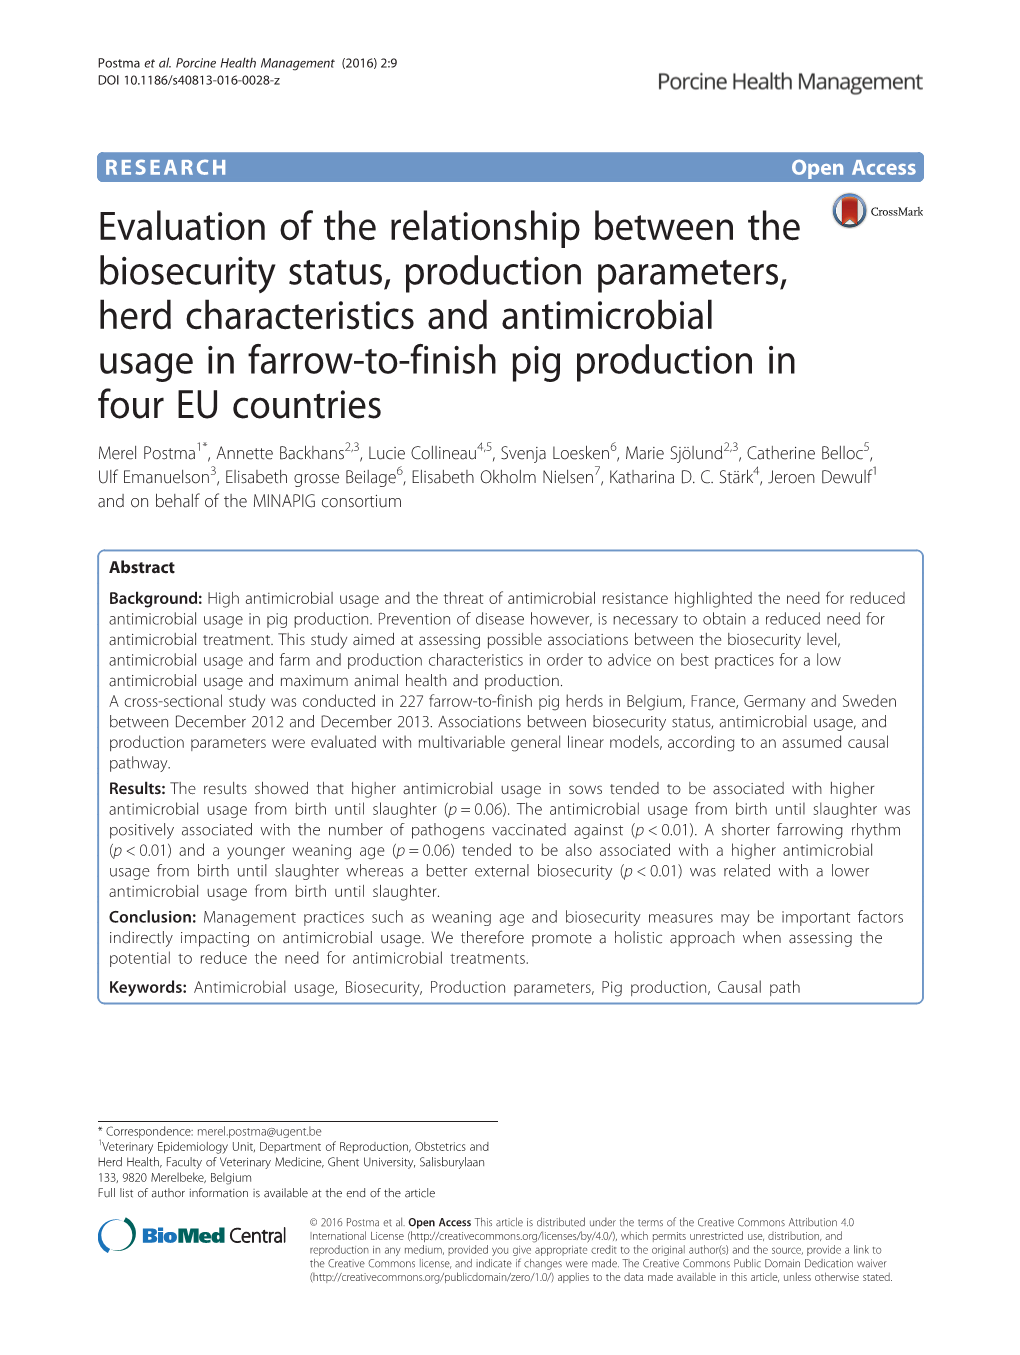 Evaluation of the Relationship Between the Biosecurity Status, Production